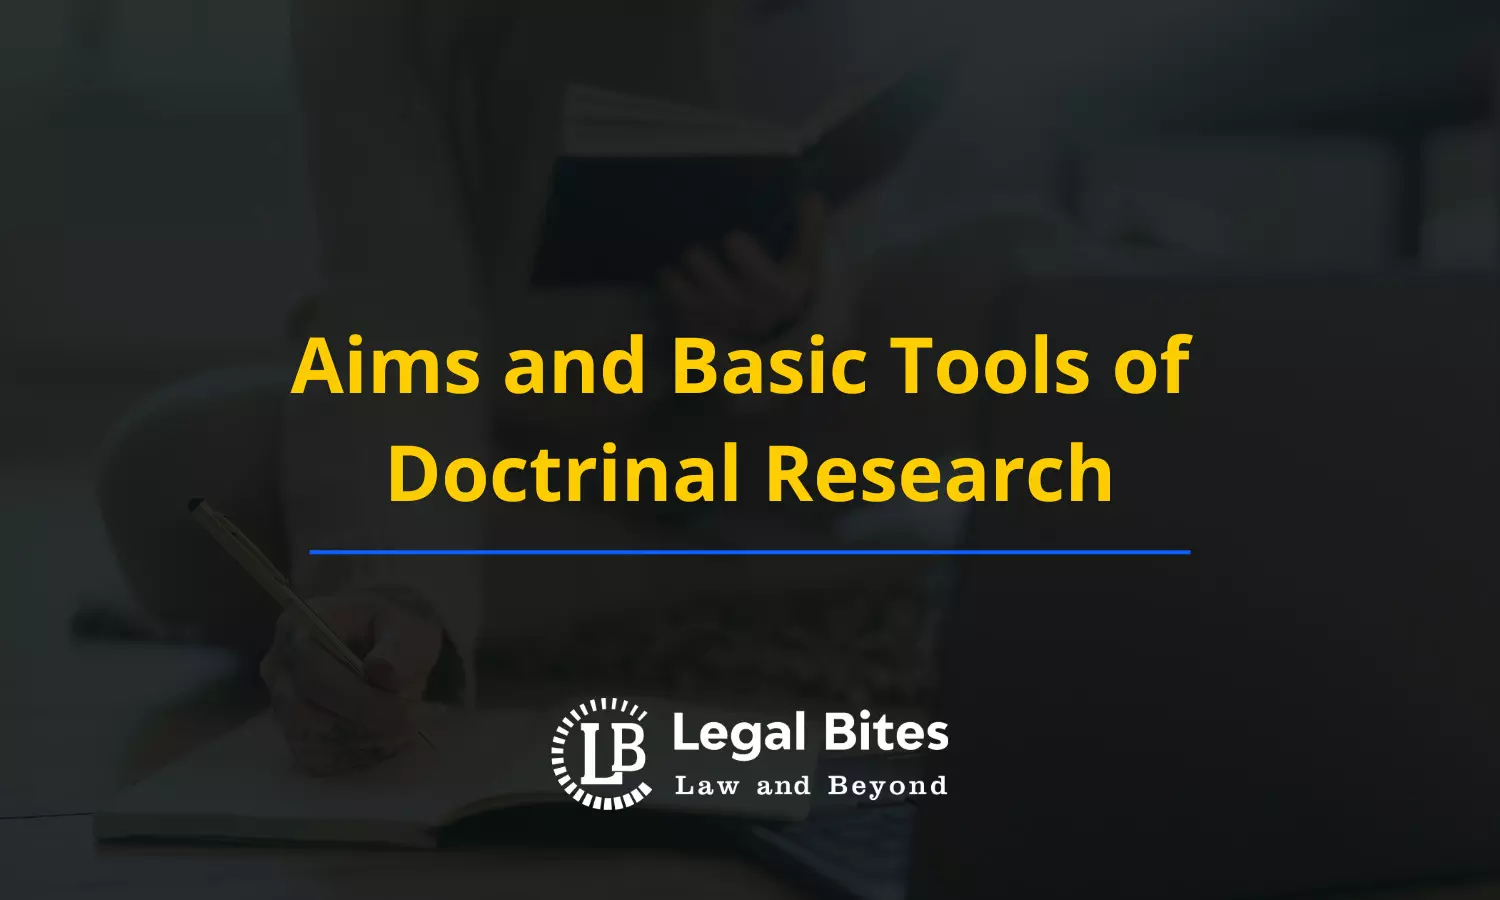 Aims and Basic Tools of Doctrinal Research